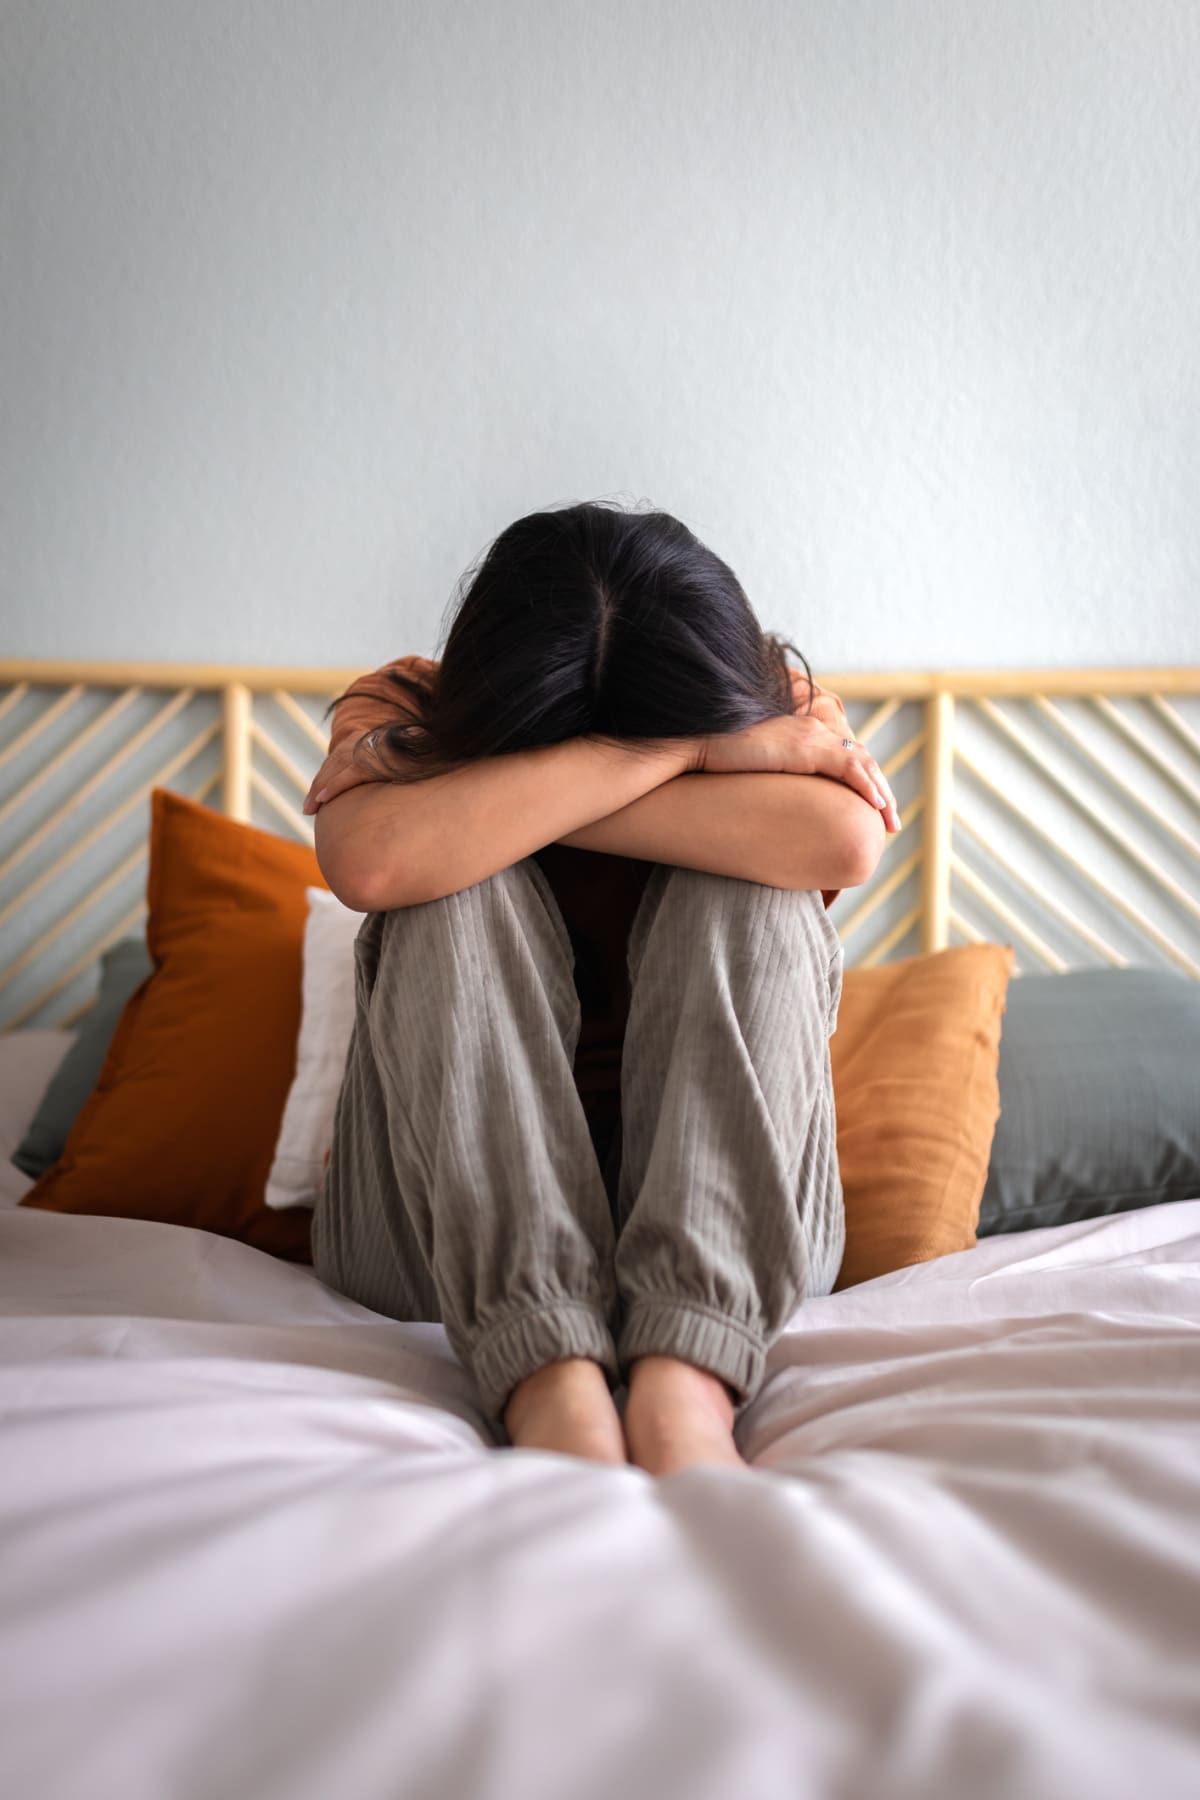 Front view of depressed and sad young woman sitting on the bed crying. Vertical image. Sadness and mental health concepts.